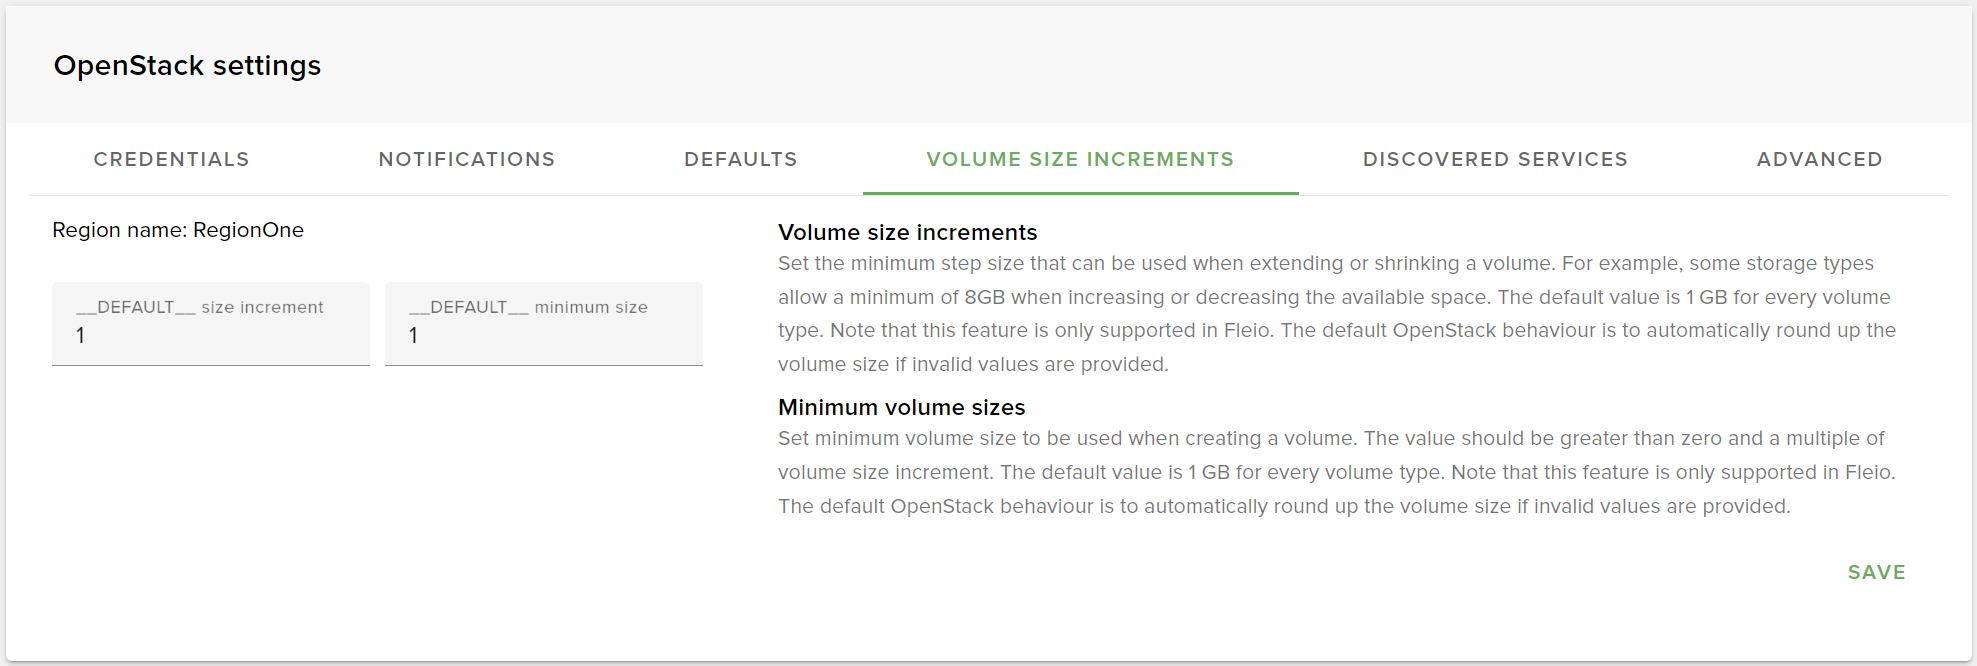 ../_images/openstack-volume-size-increments.png